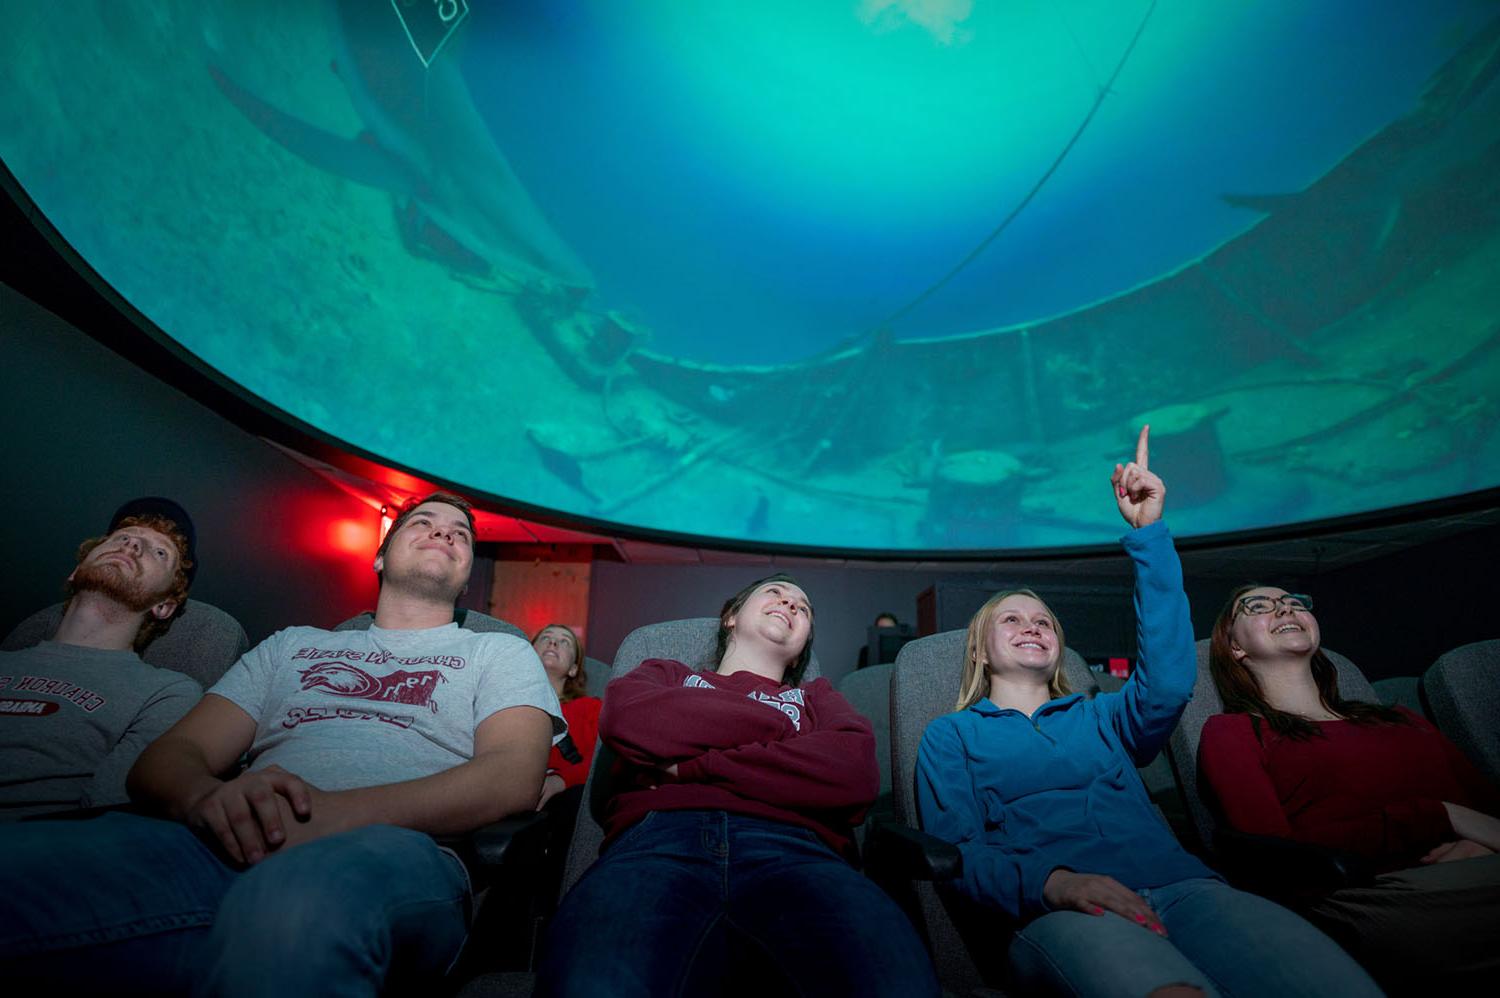 Students watch a show in the planetarium